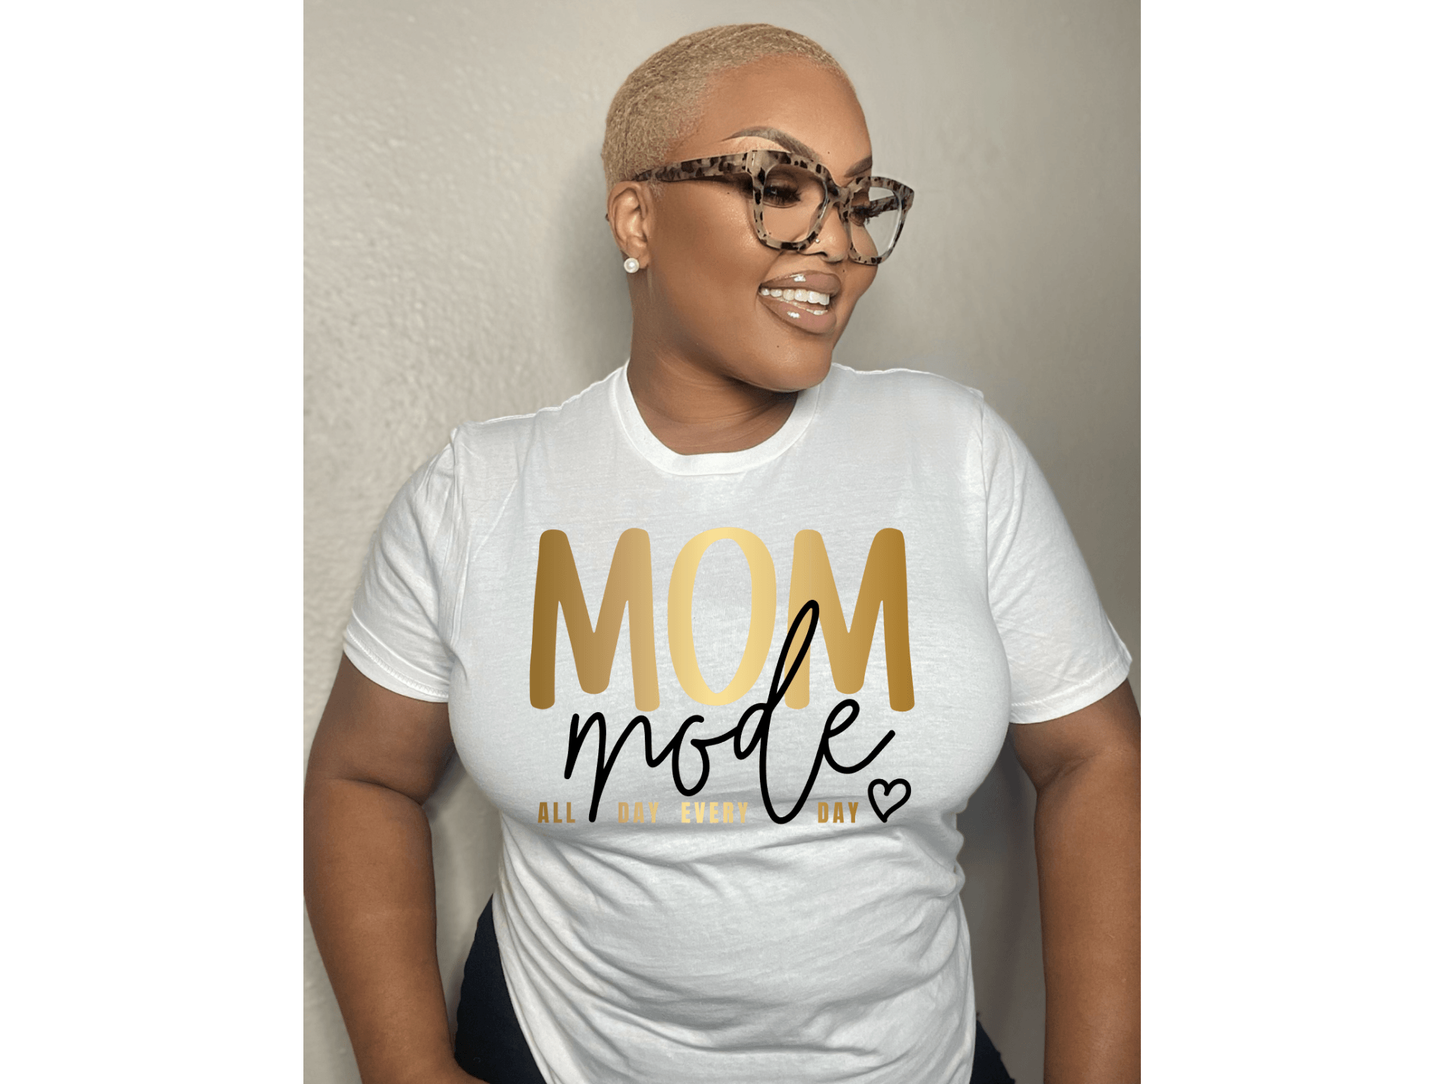 Mom mode all day everyday t-shirt or hoodie (New Arrival)